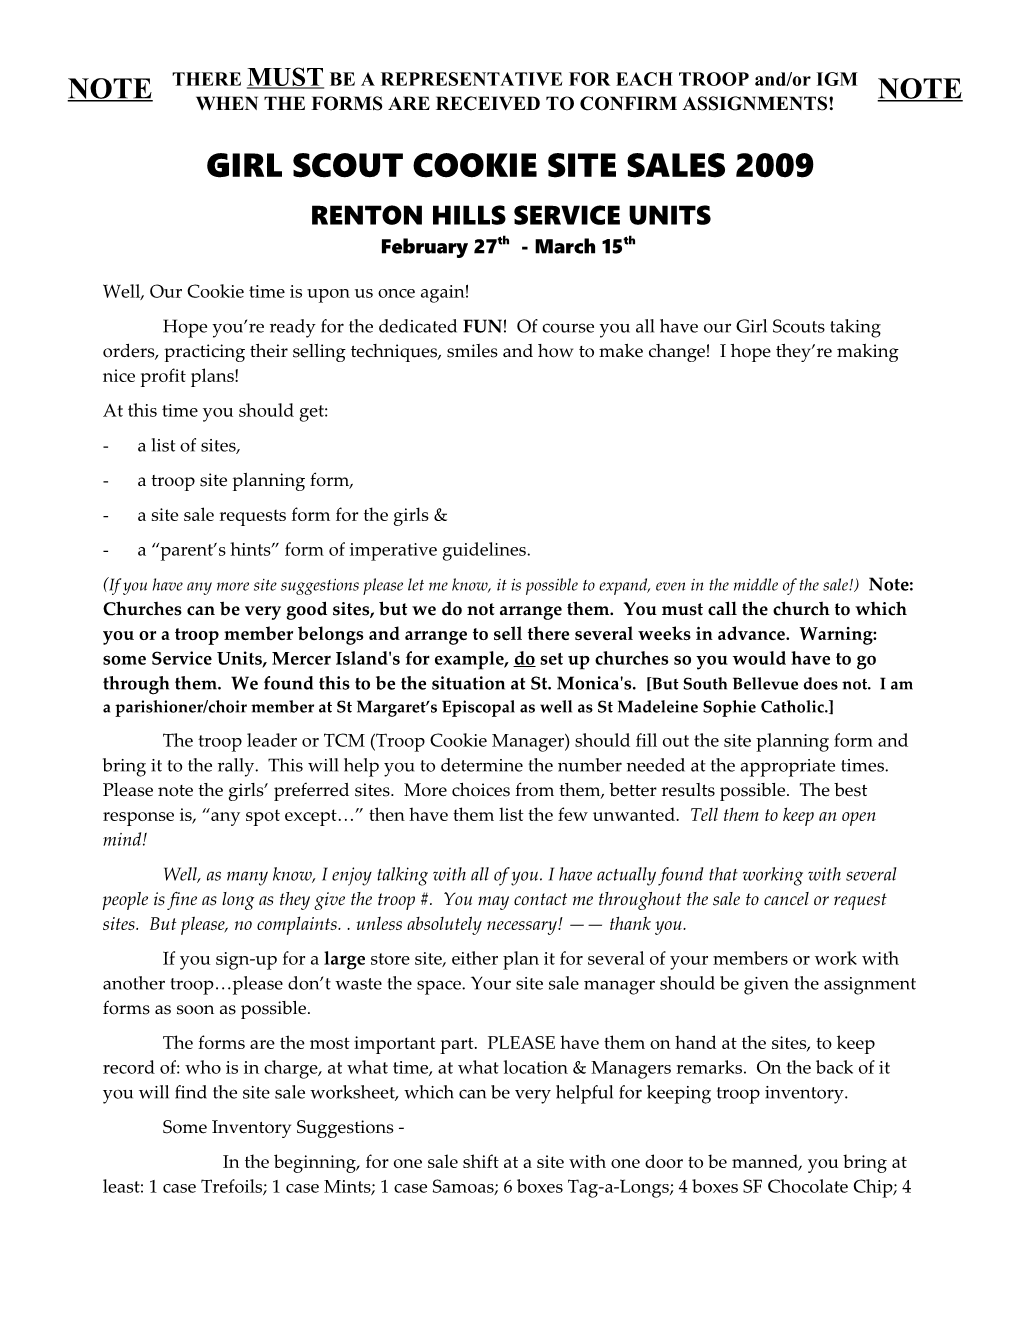 Girl Scout Cookie Site Sales 2002